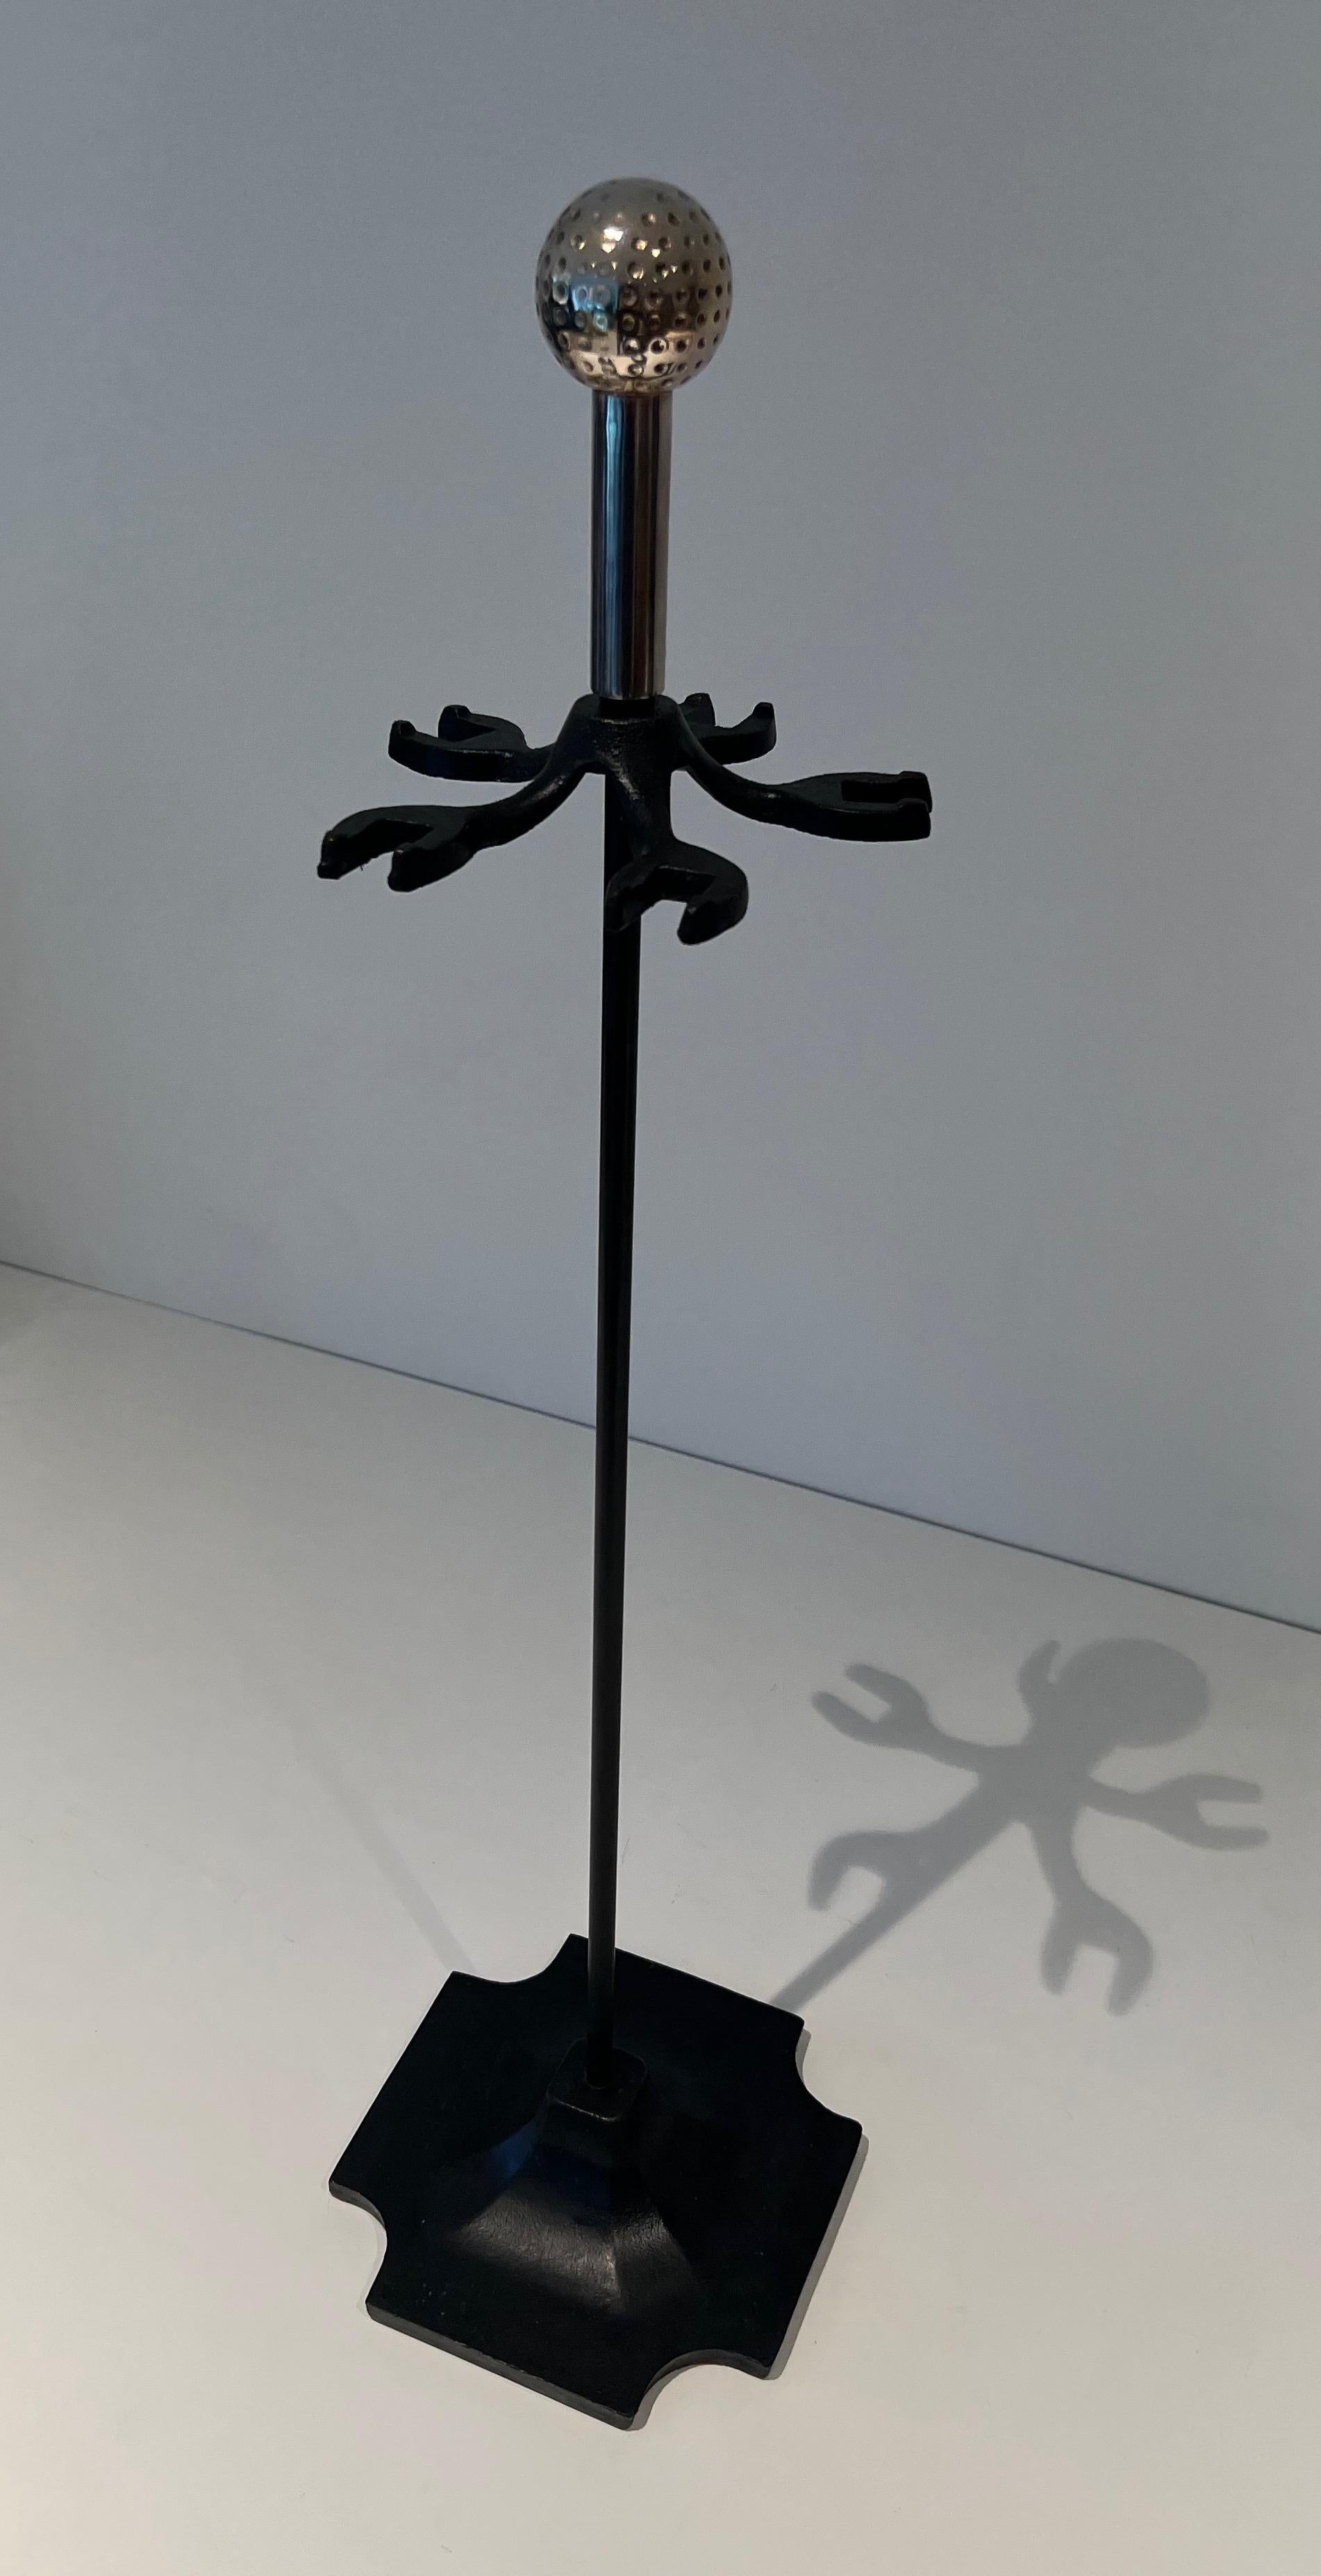 Black Lacquered Metal and Chrome Fireplace Tools on Stand 